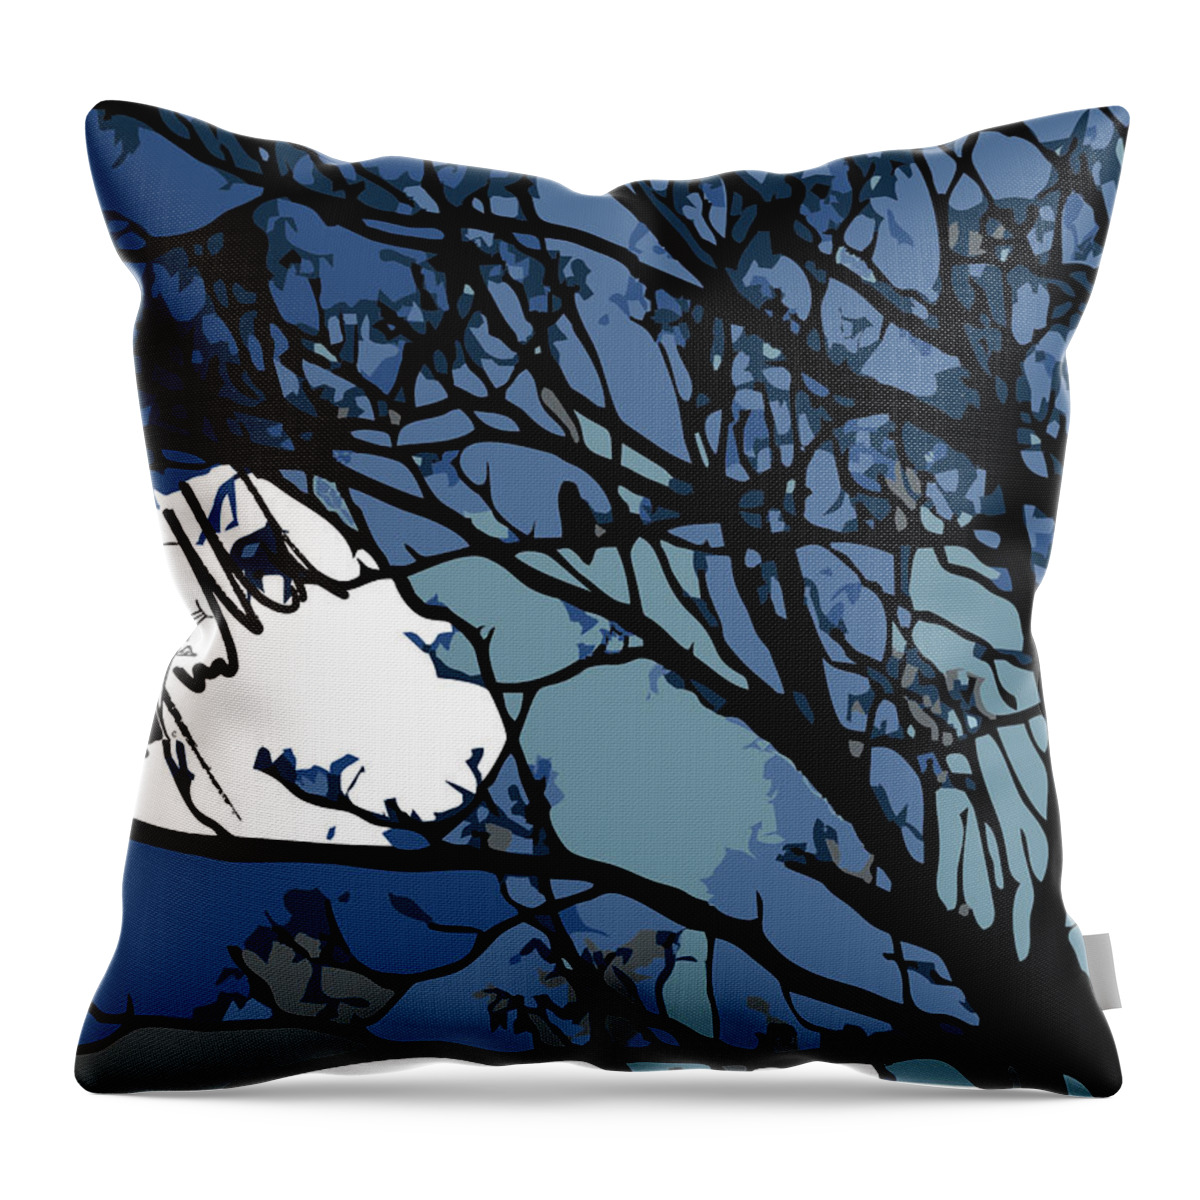  Throw Pillow featuring the digital art Tree Daylight by Jimmy Williams